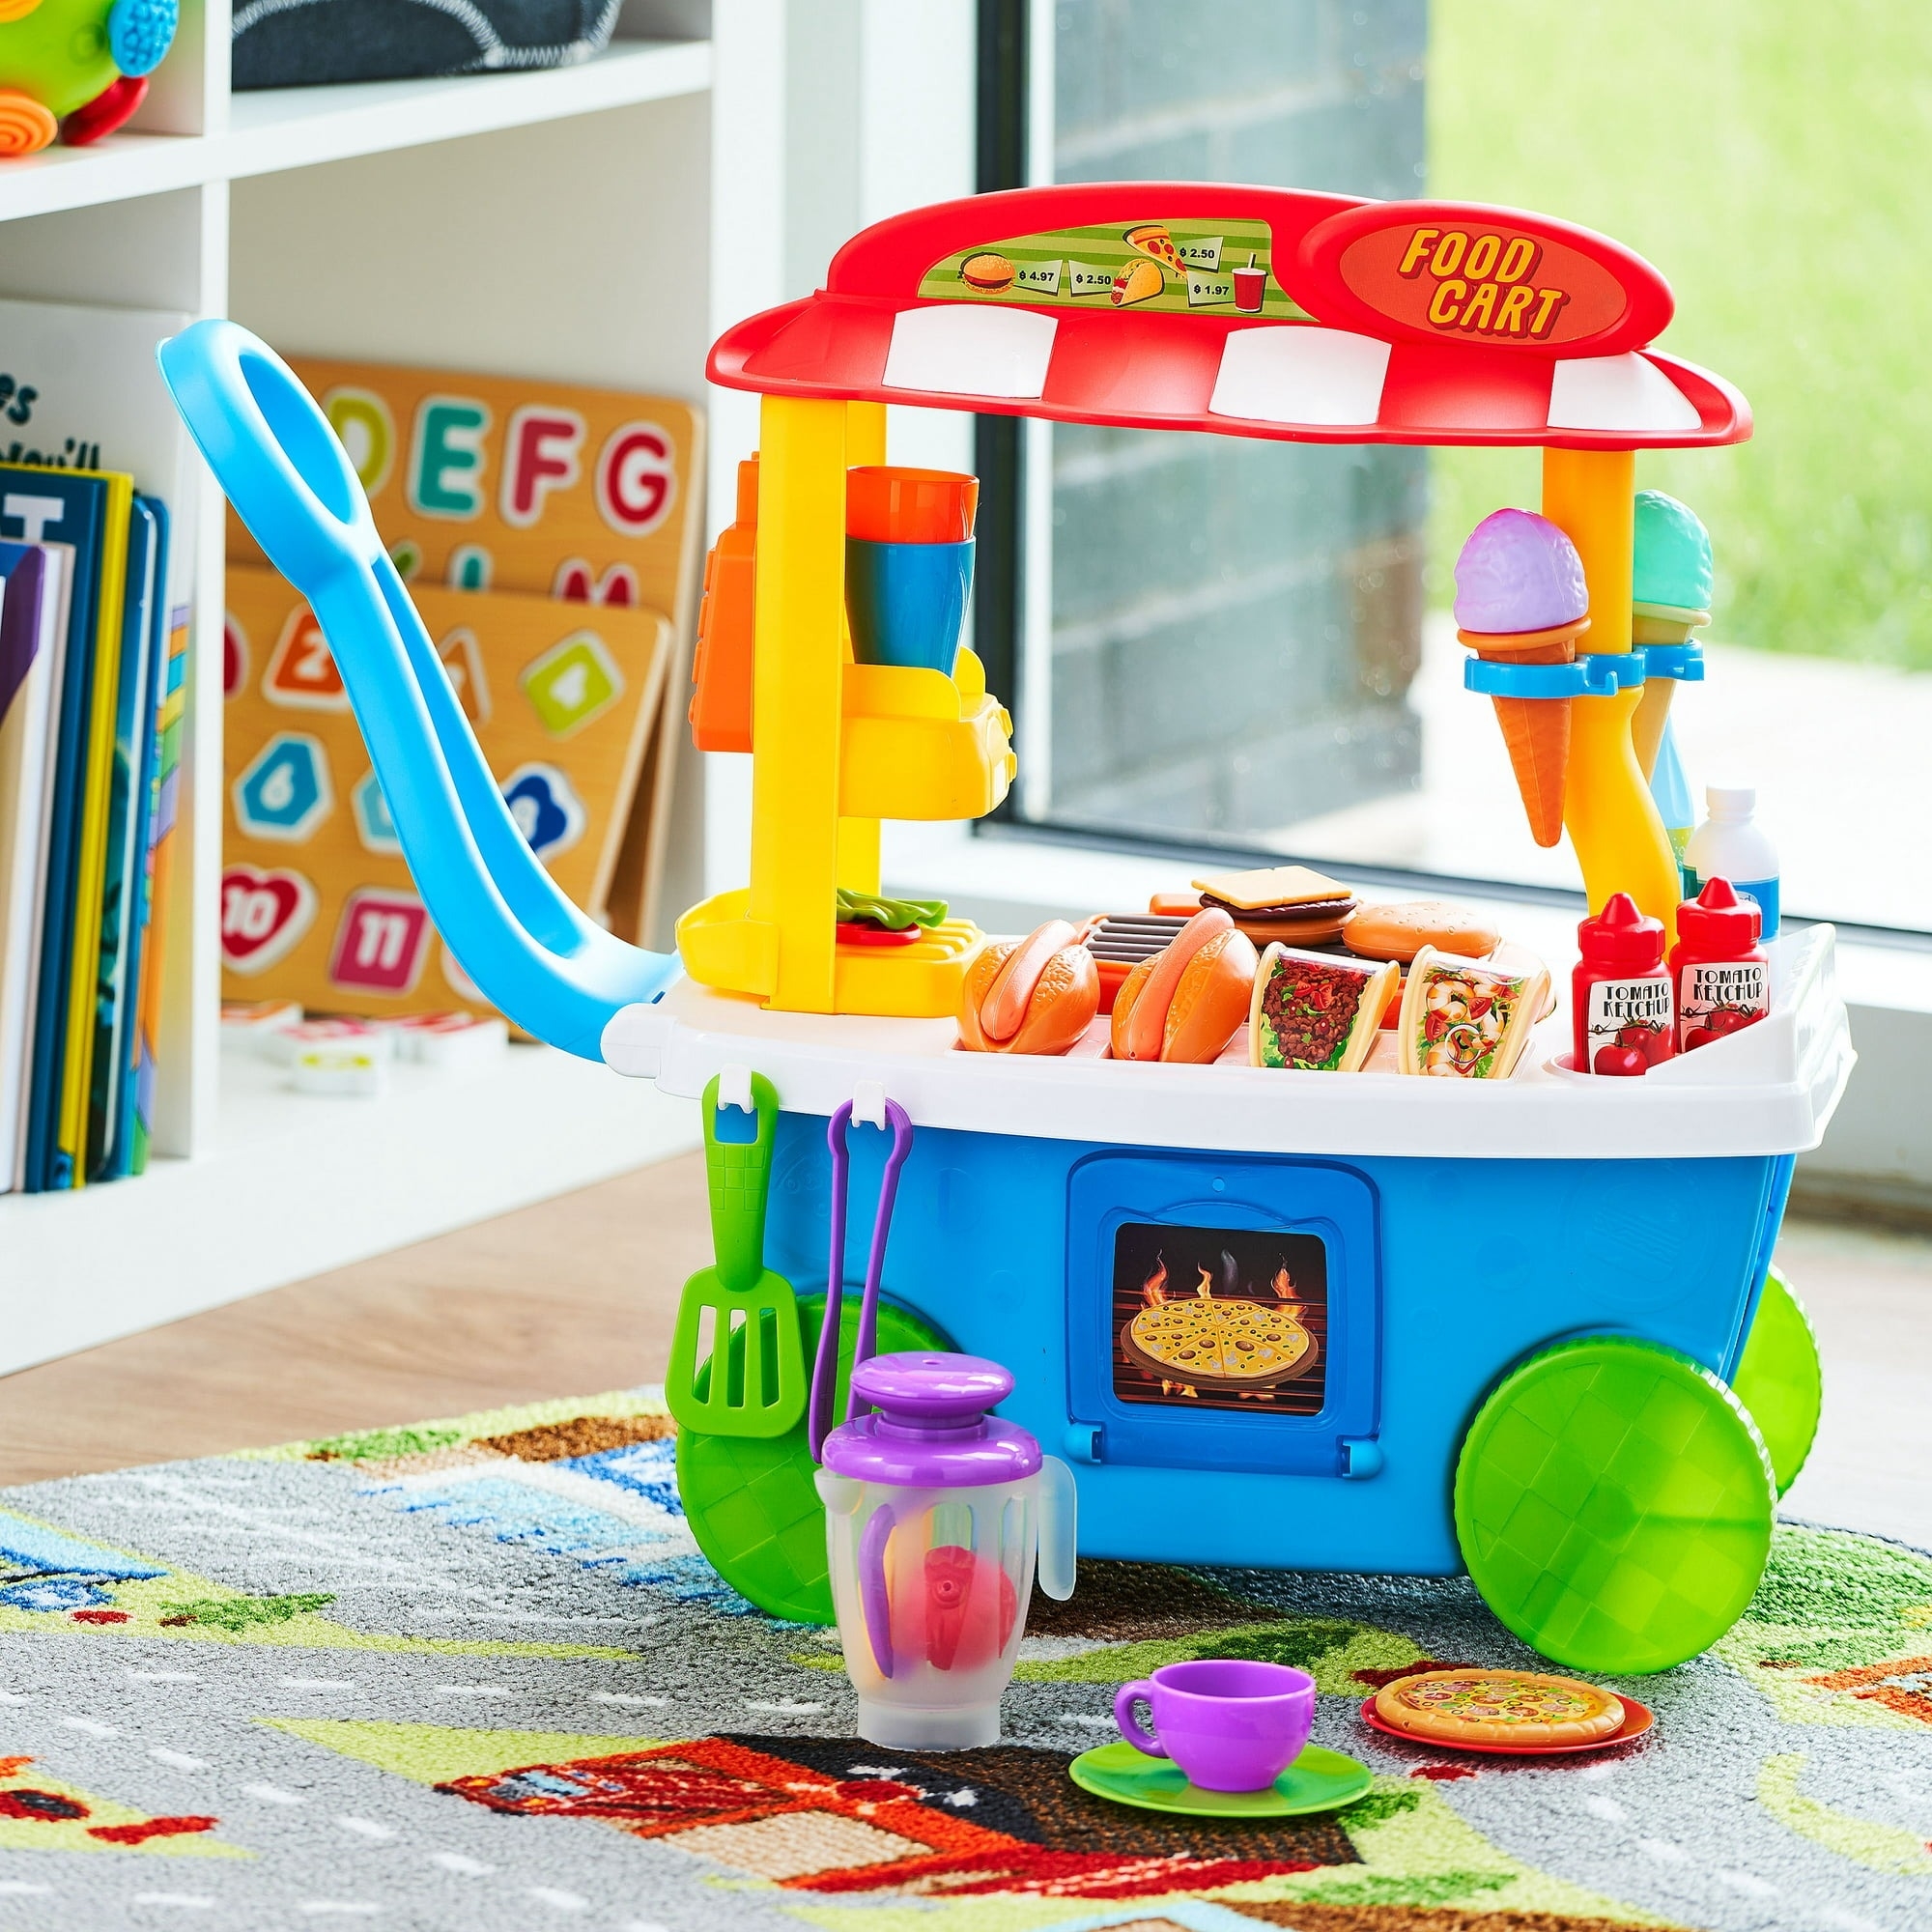 A food cart toy and accessories